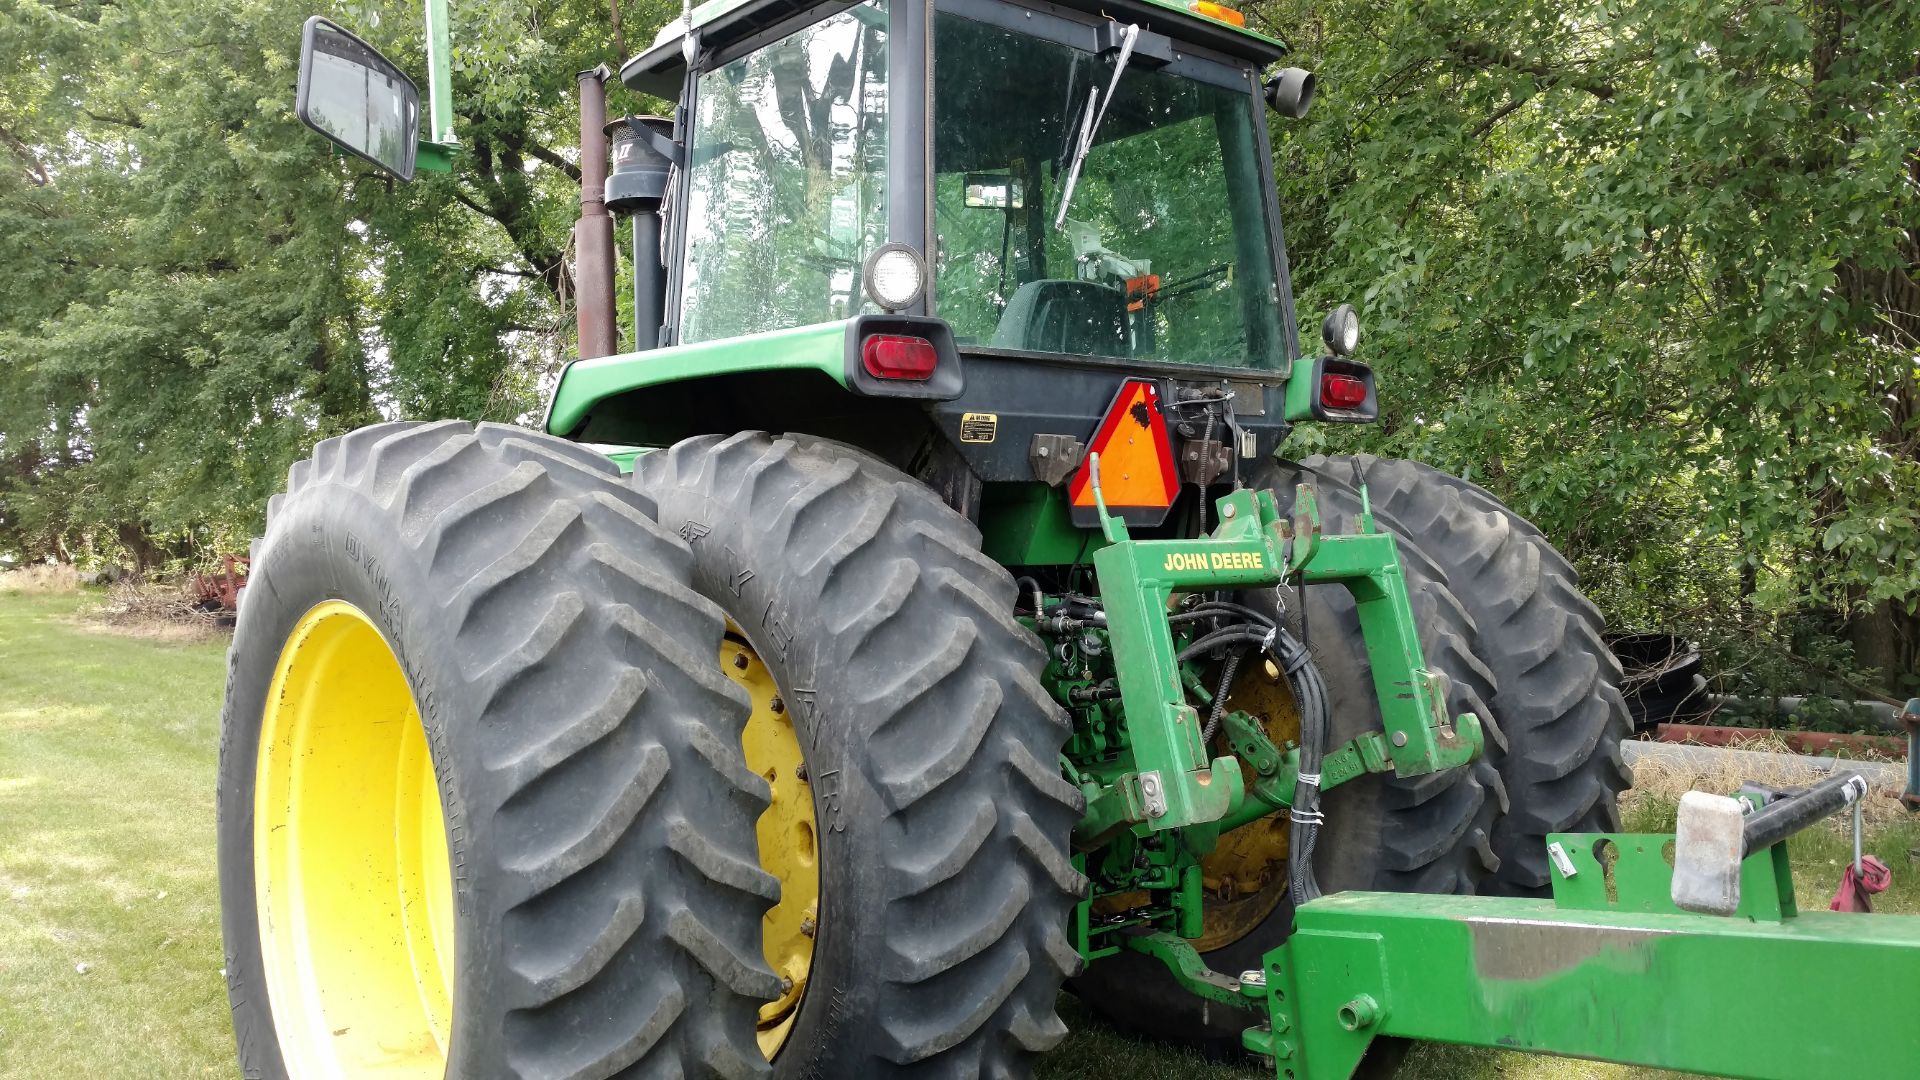 J.D. 4440 Tractor (1982 model) 5287 hours, Power Shift, 18.4 x 42" Tires and Duals, Front Rock - Image 2 of 3